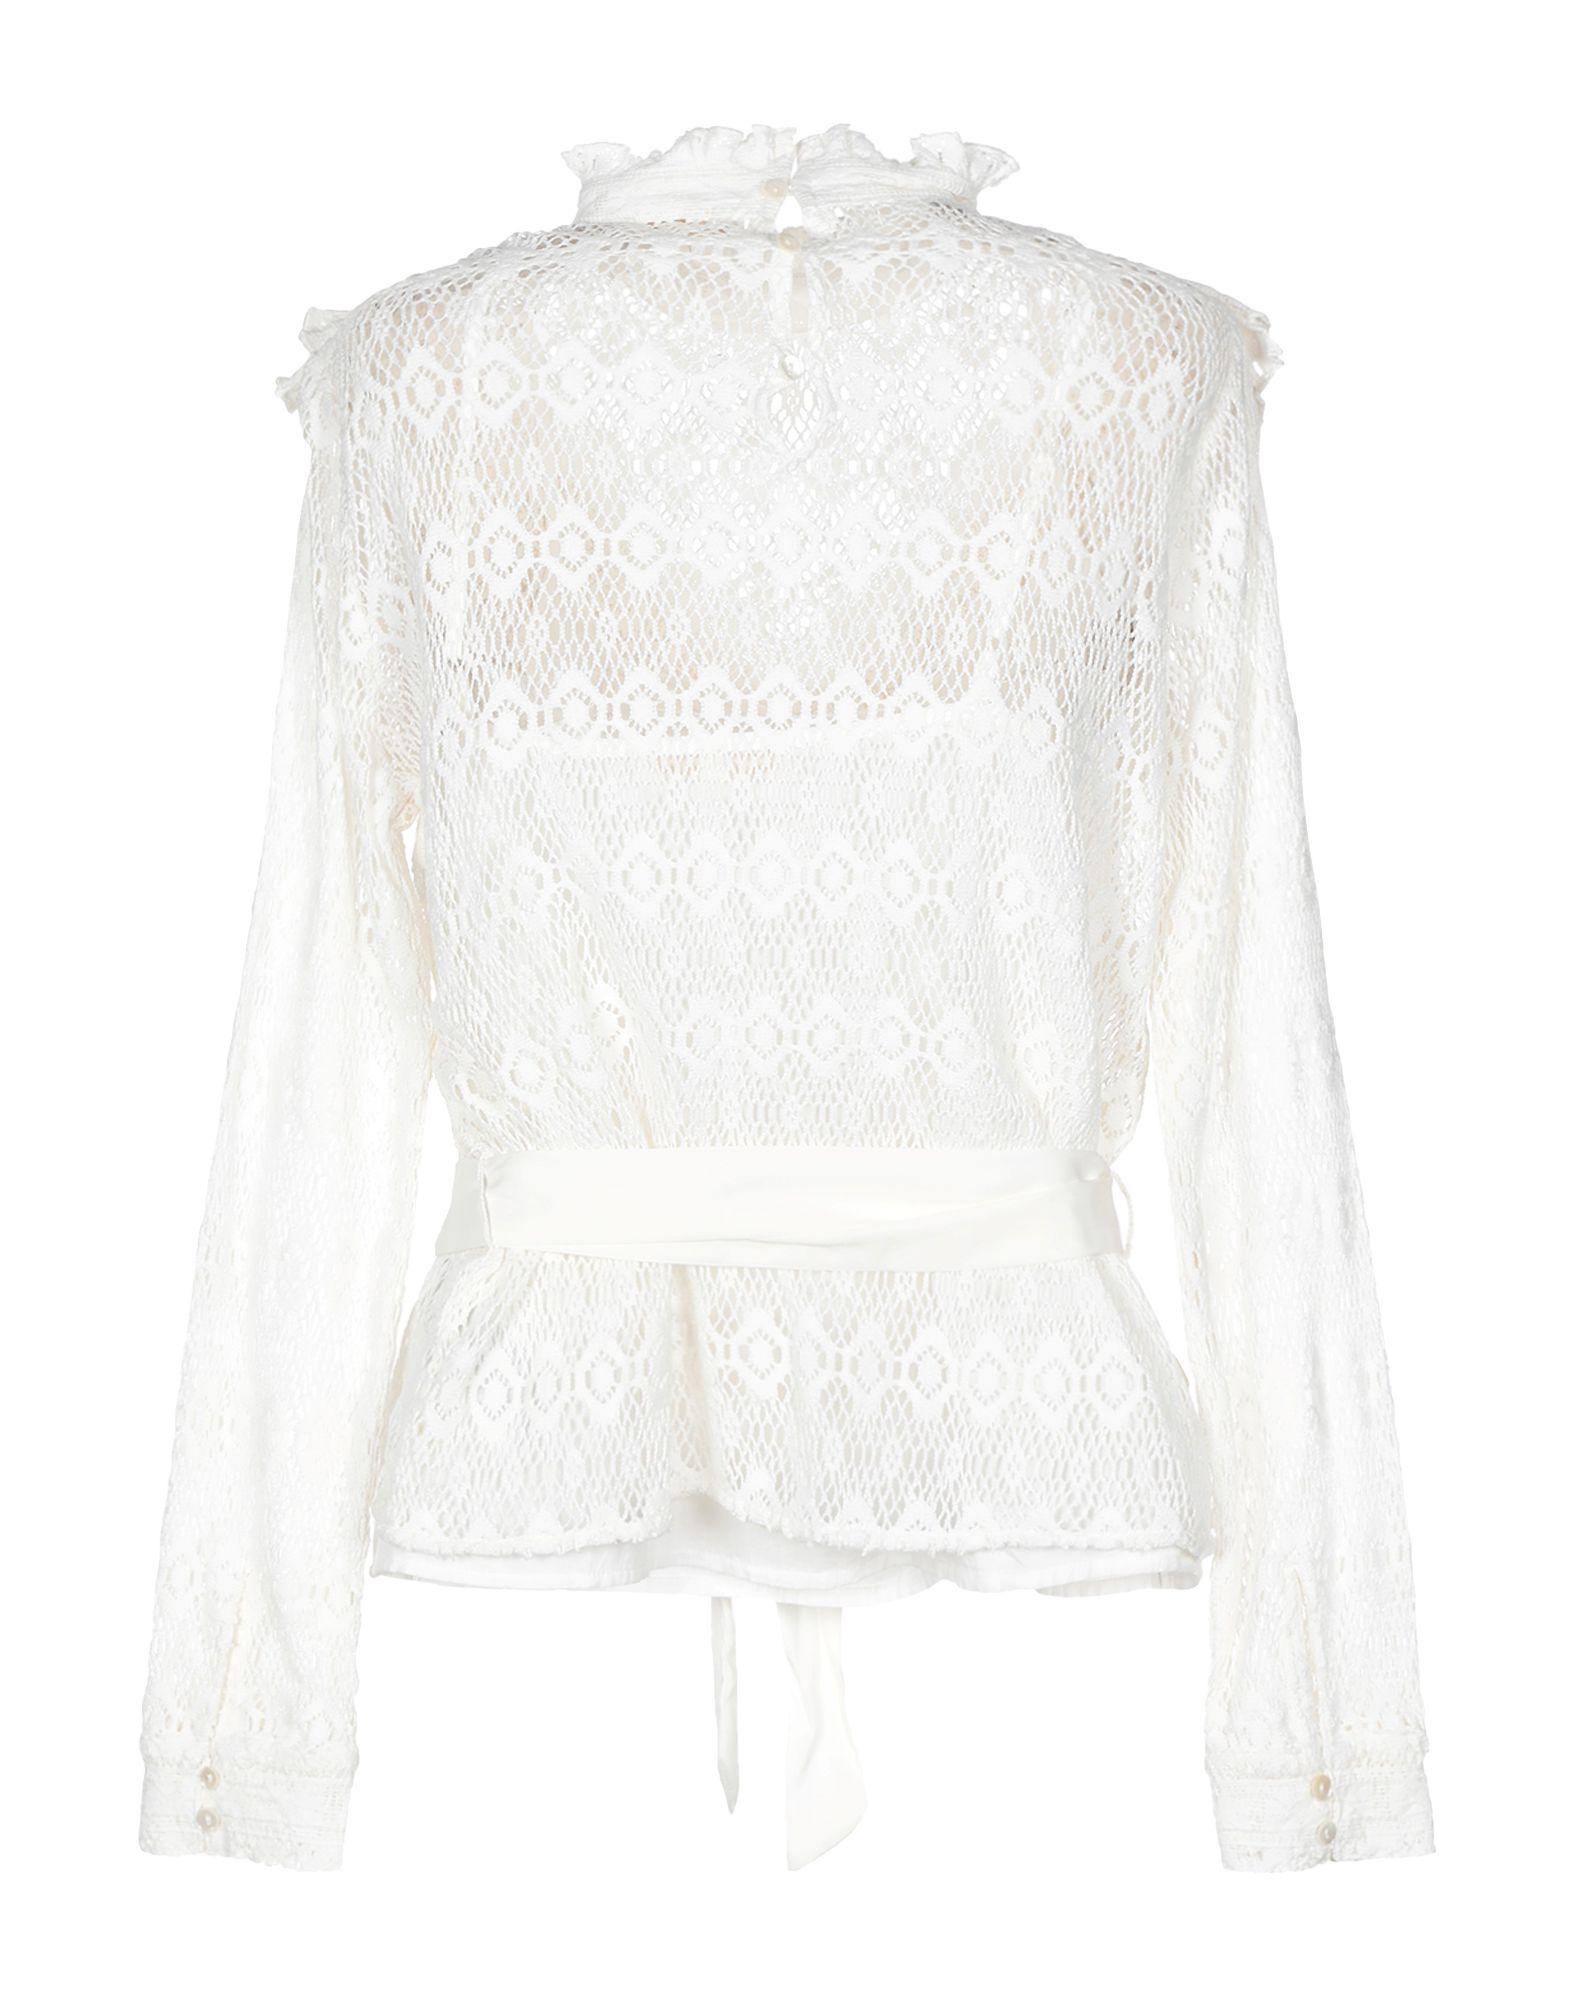 Maje Lace Blouse in White - Lyst